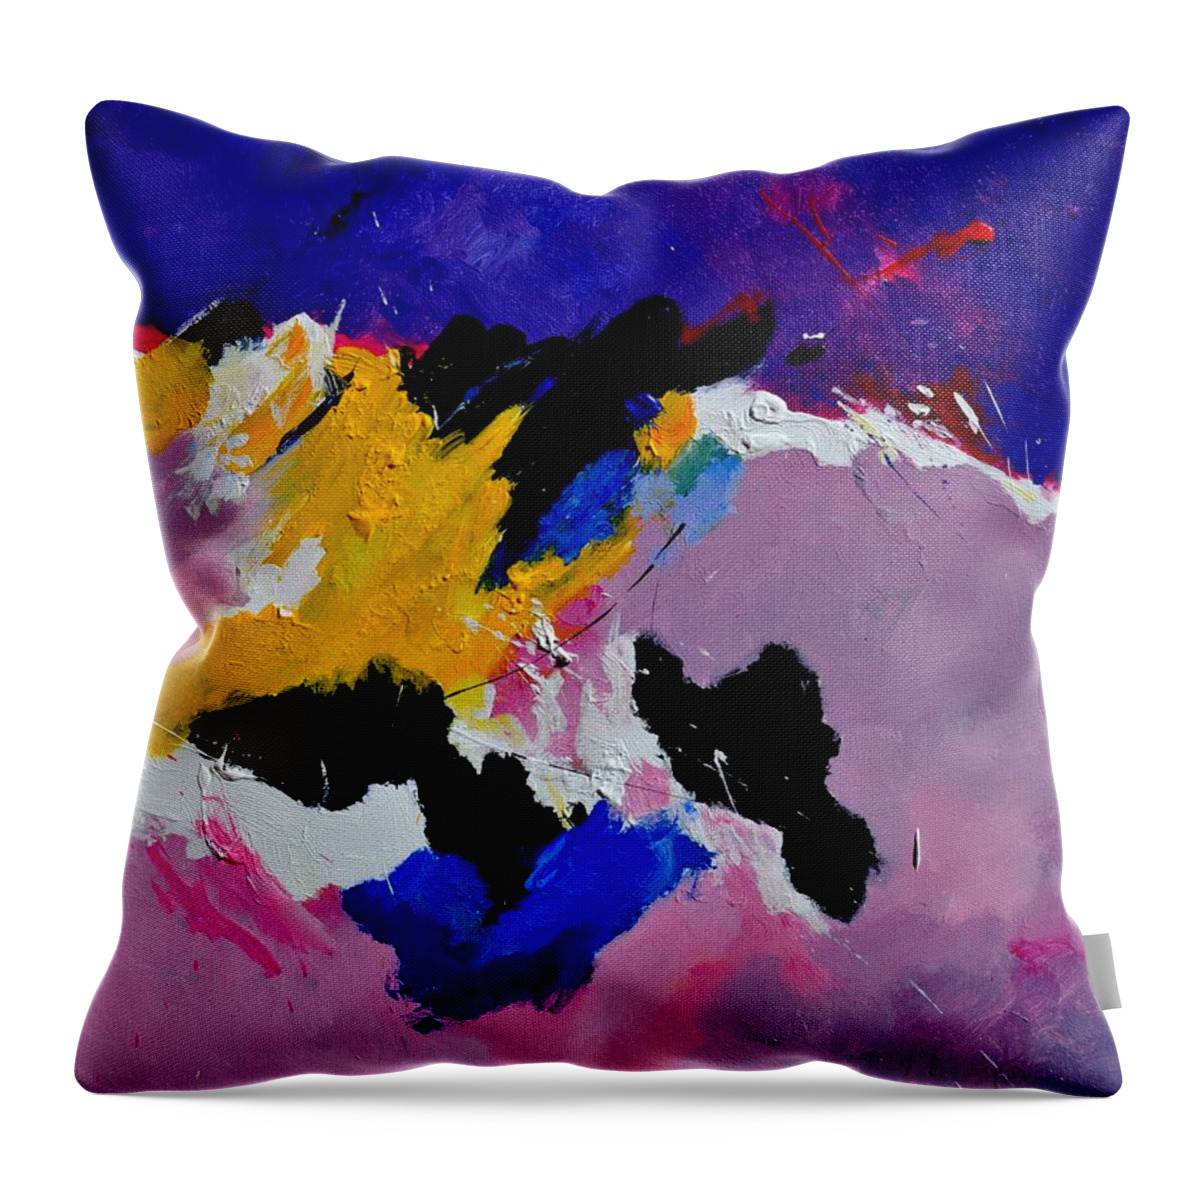 Abstract Throw Pillow featuring the painting Abstract 760170 by Pol Ledent